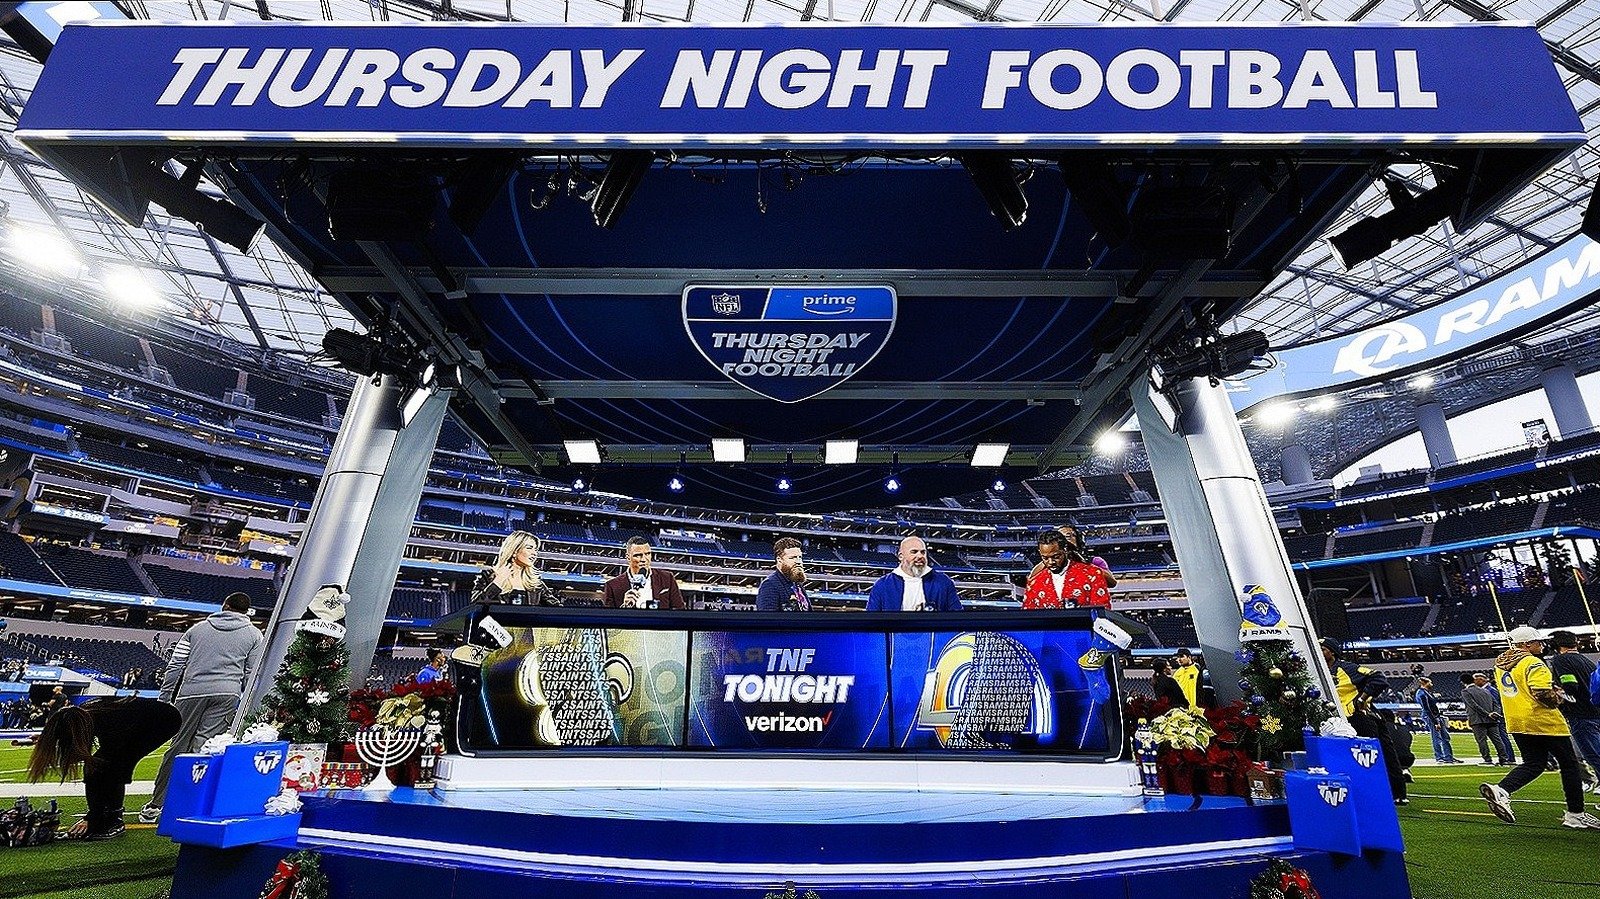 How Much Do TV Networks Pay For NFL Games?